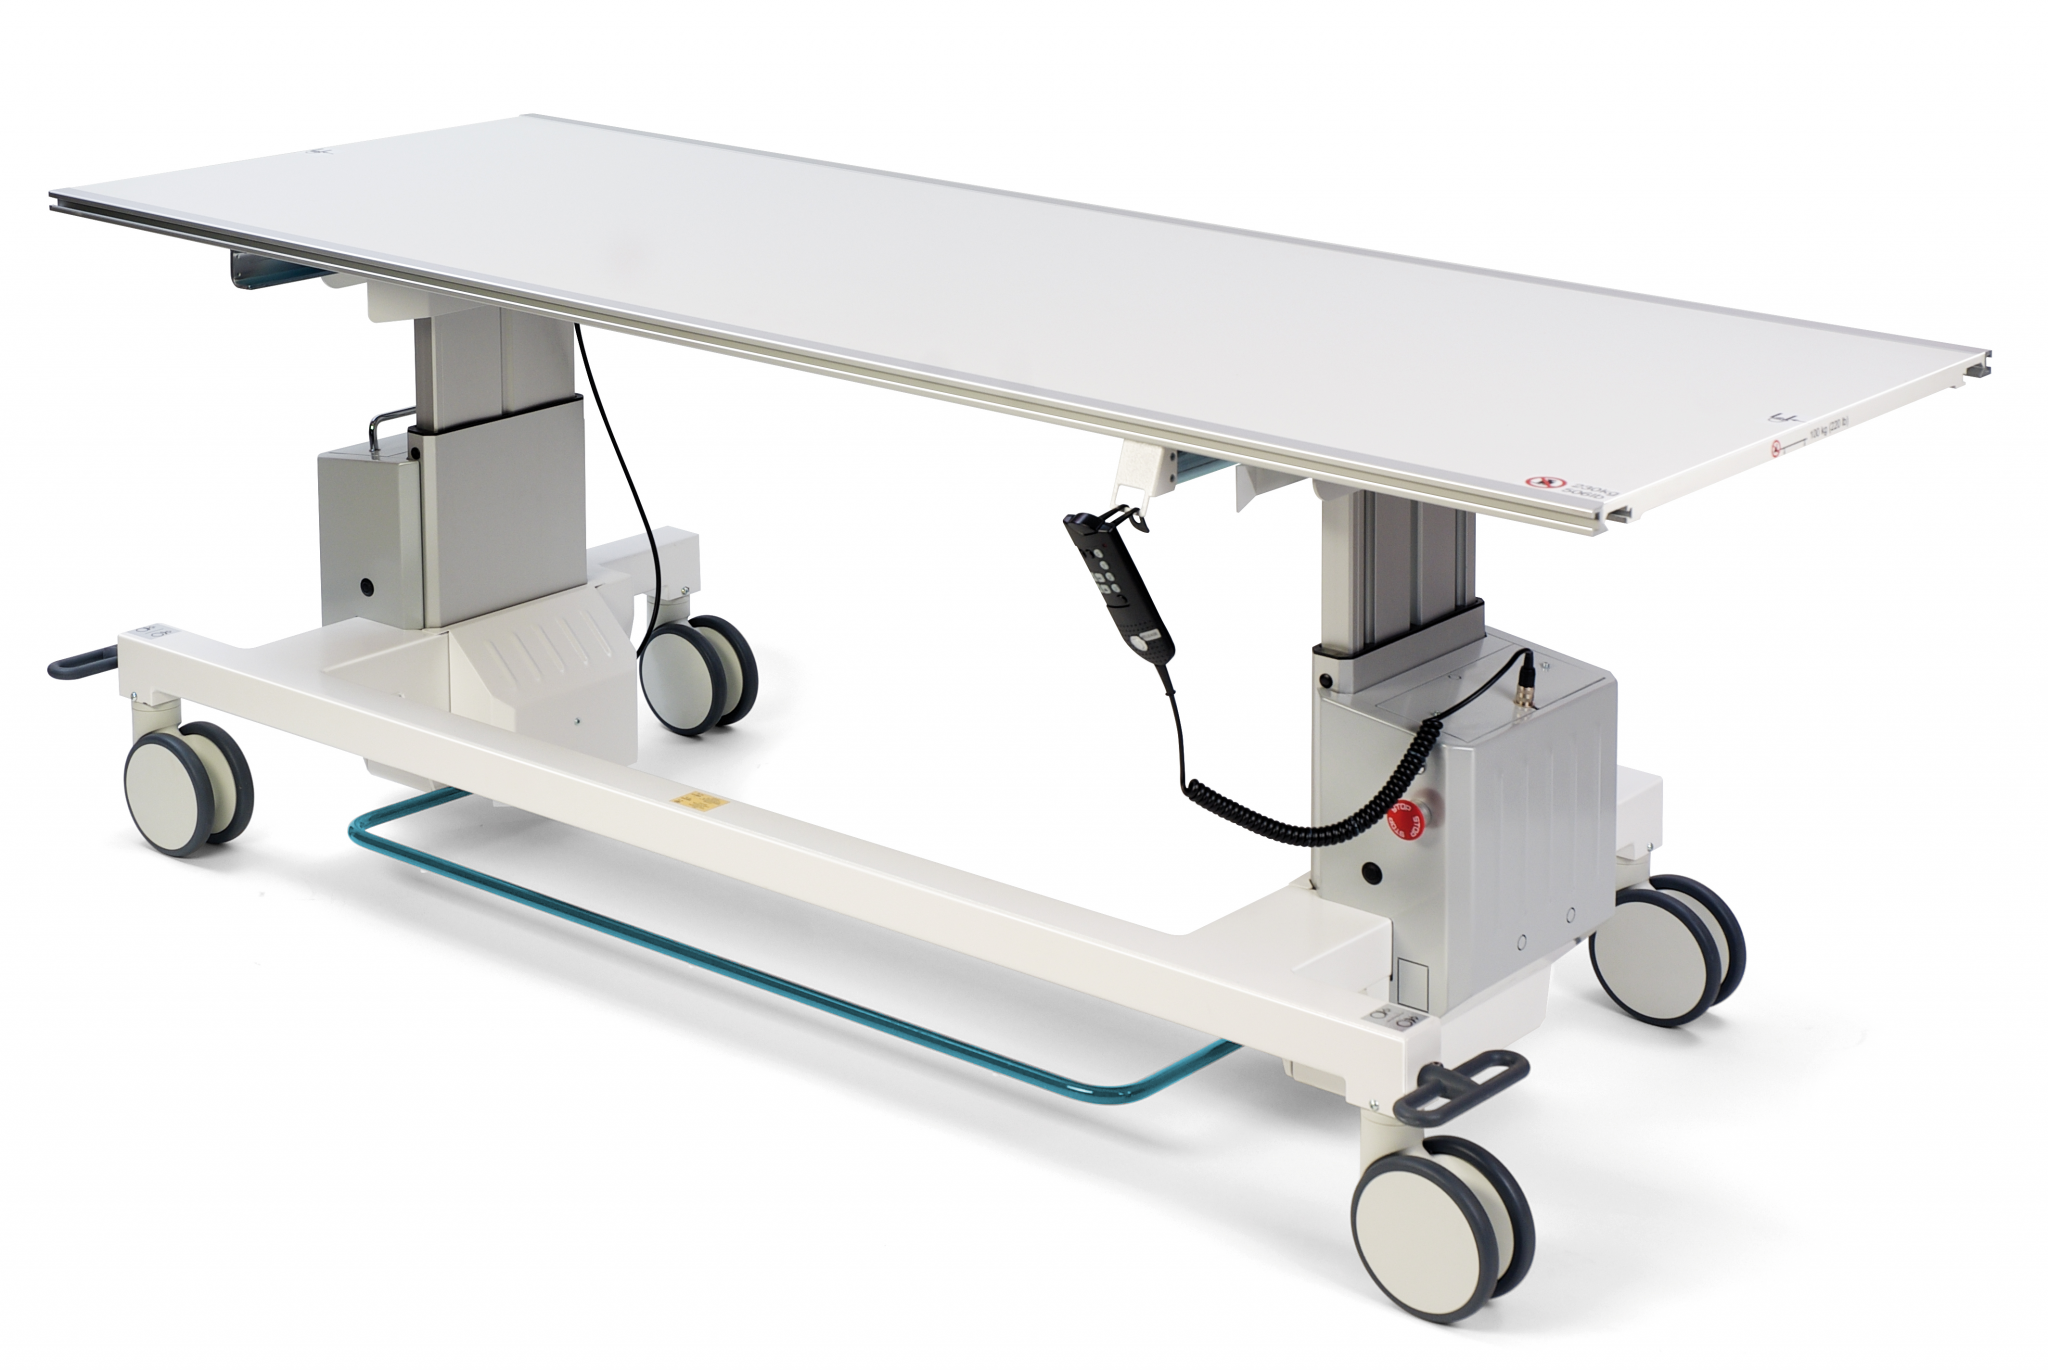 X-ray tables